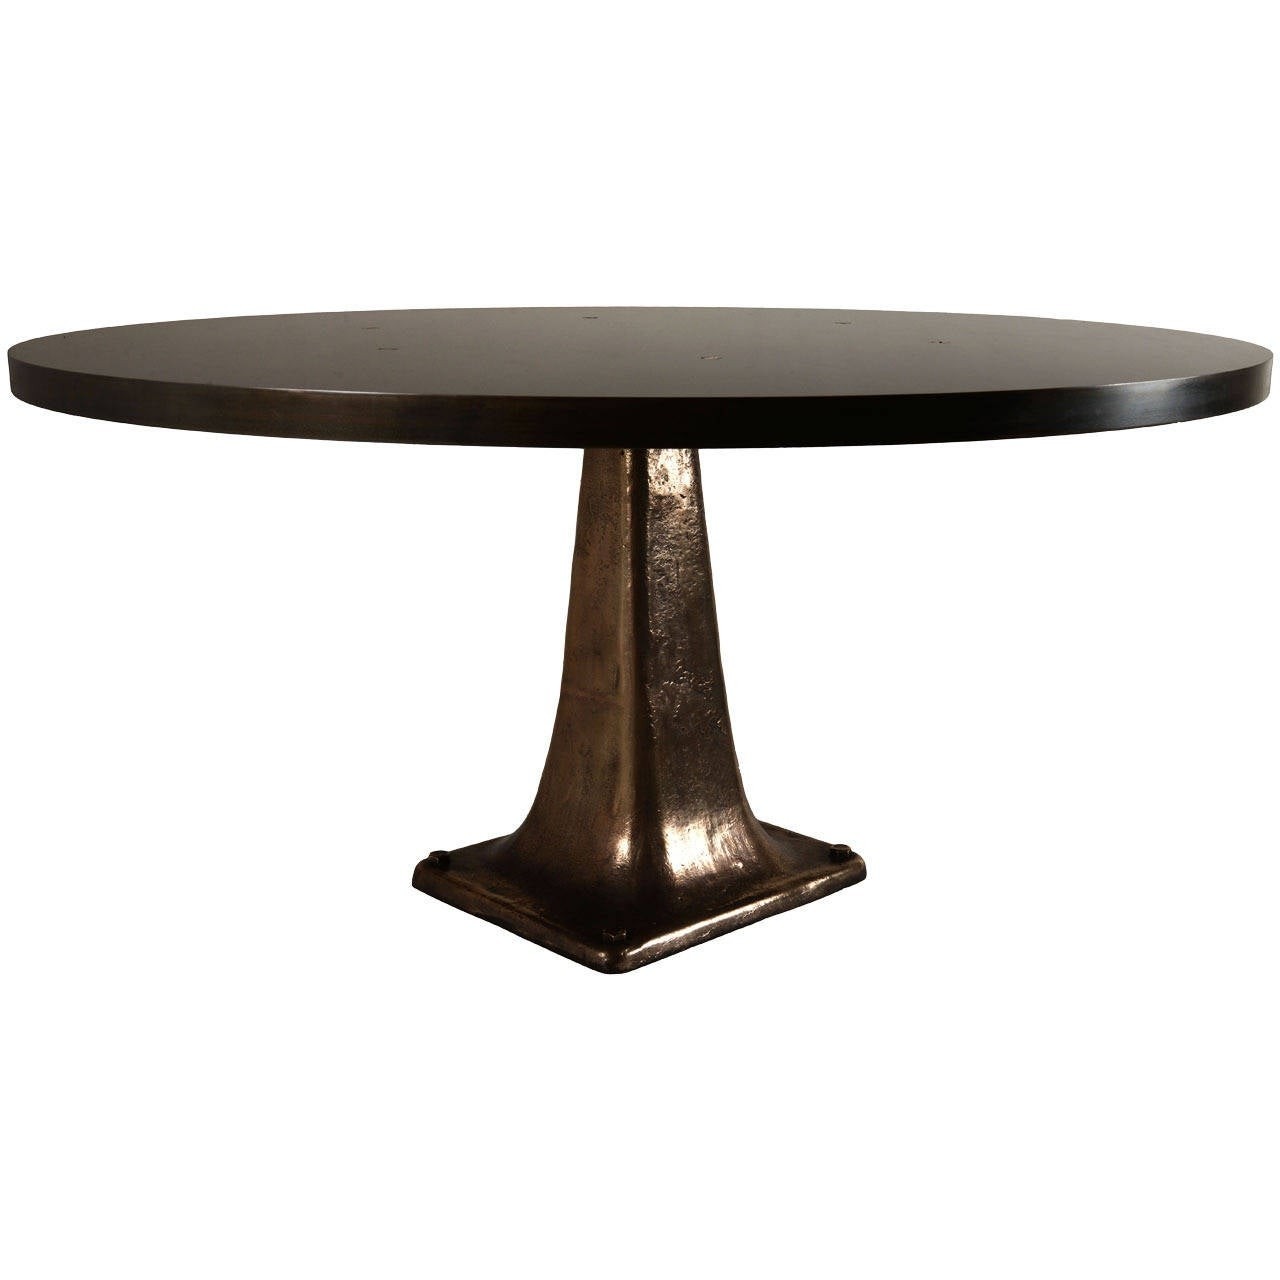 Cast bronze pedestal steel top dining table for sale at